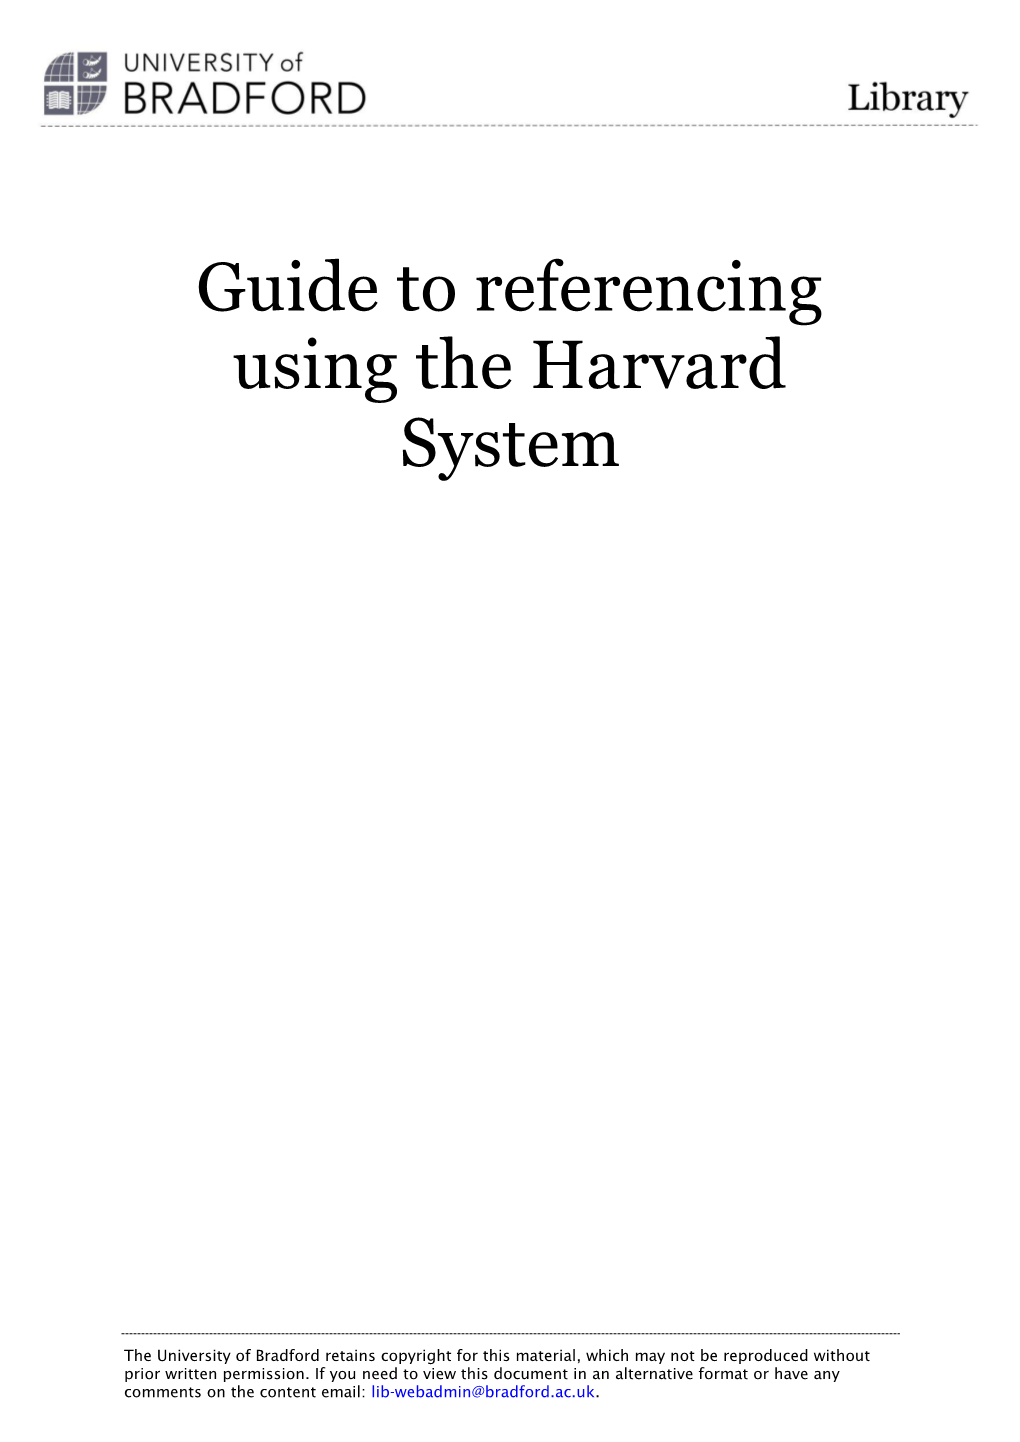 Guide to Referencing Using the Harvard System